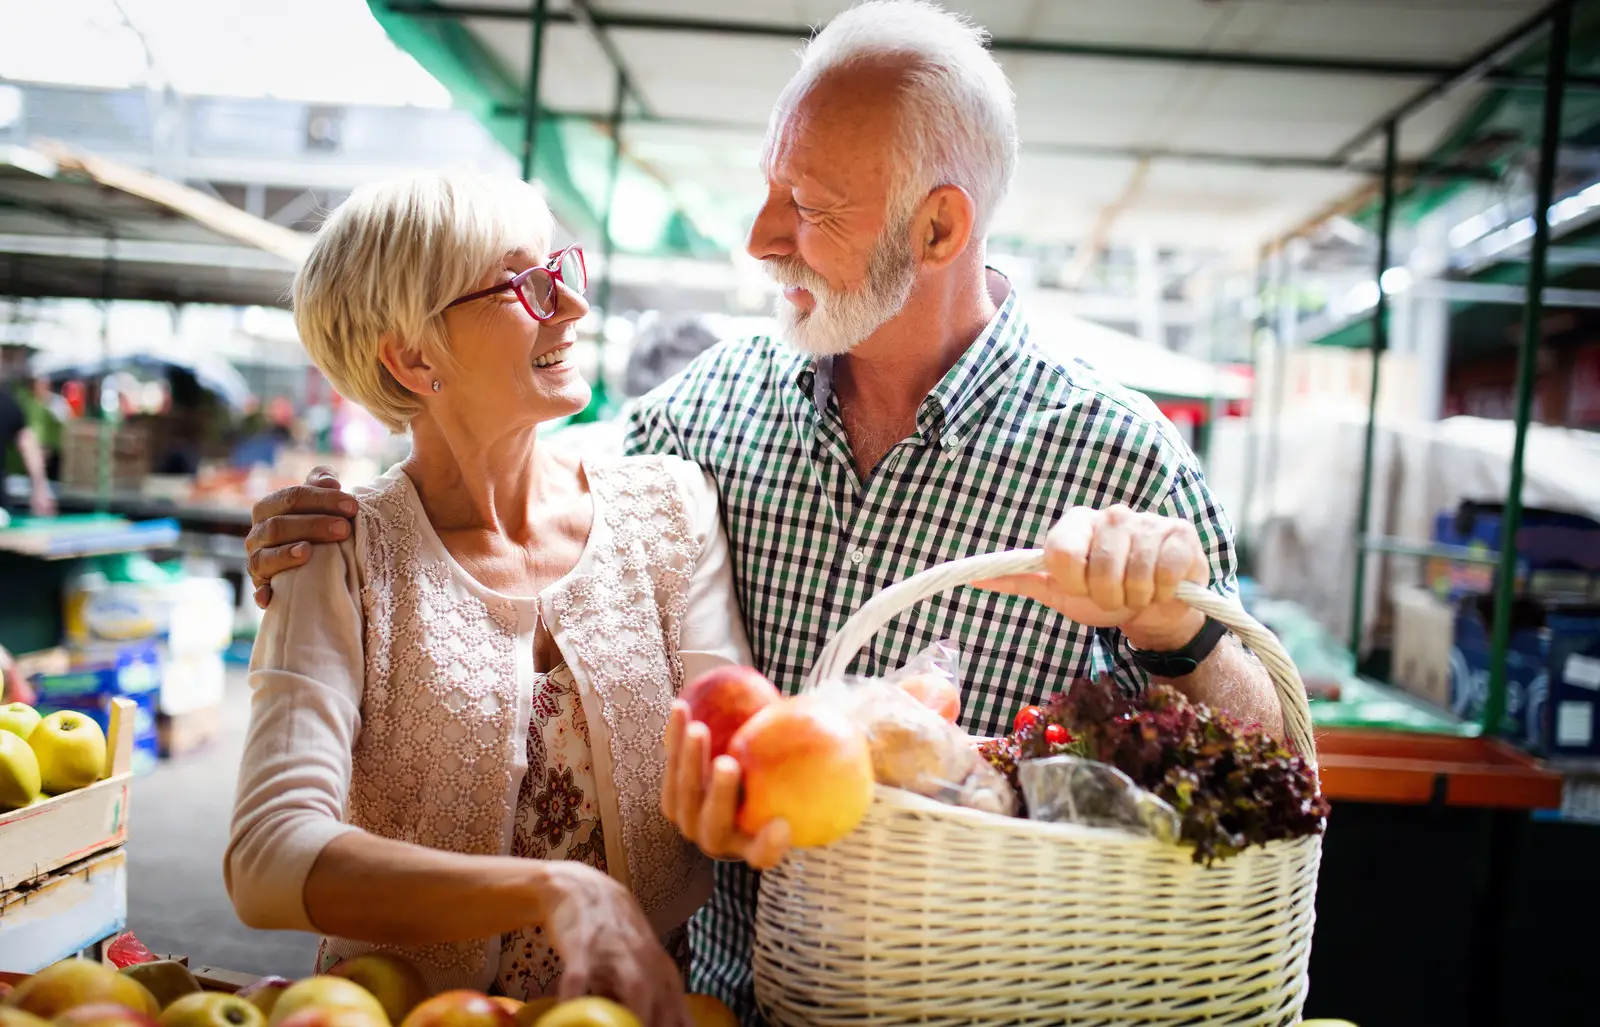 Grocery Store Discounts for Seniors- A senior couple smiling at each other holding a wicker basket of vegetables in a grocery store 